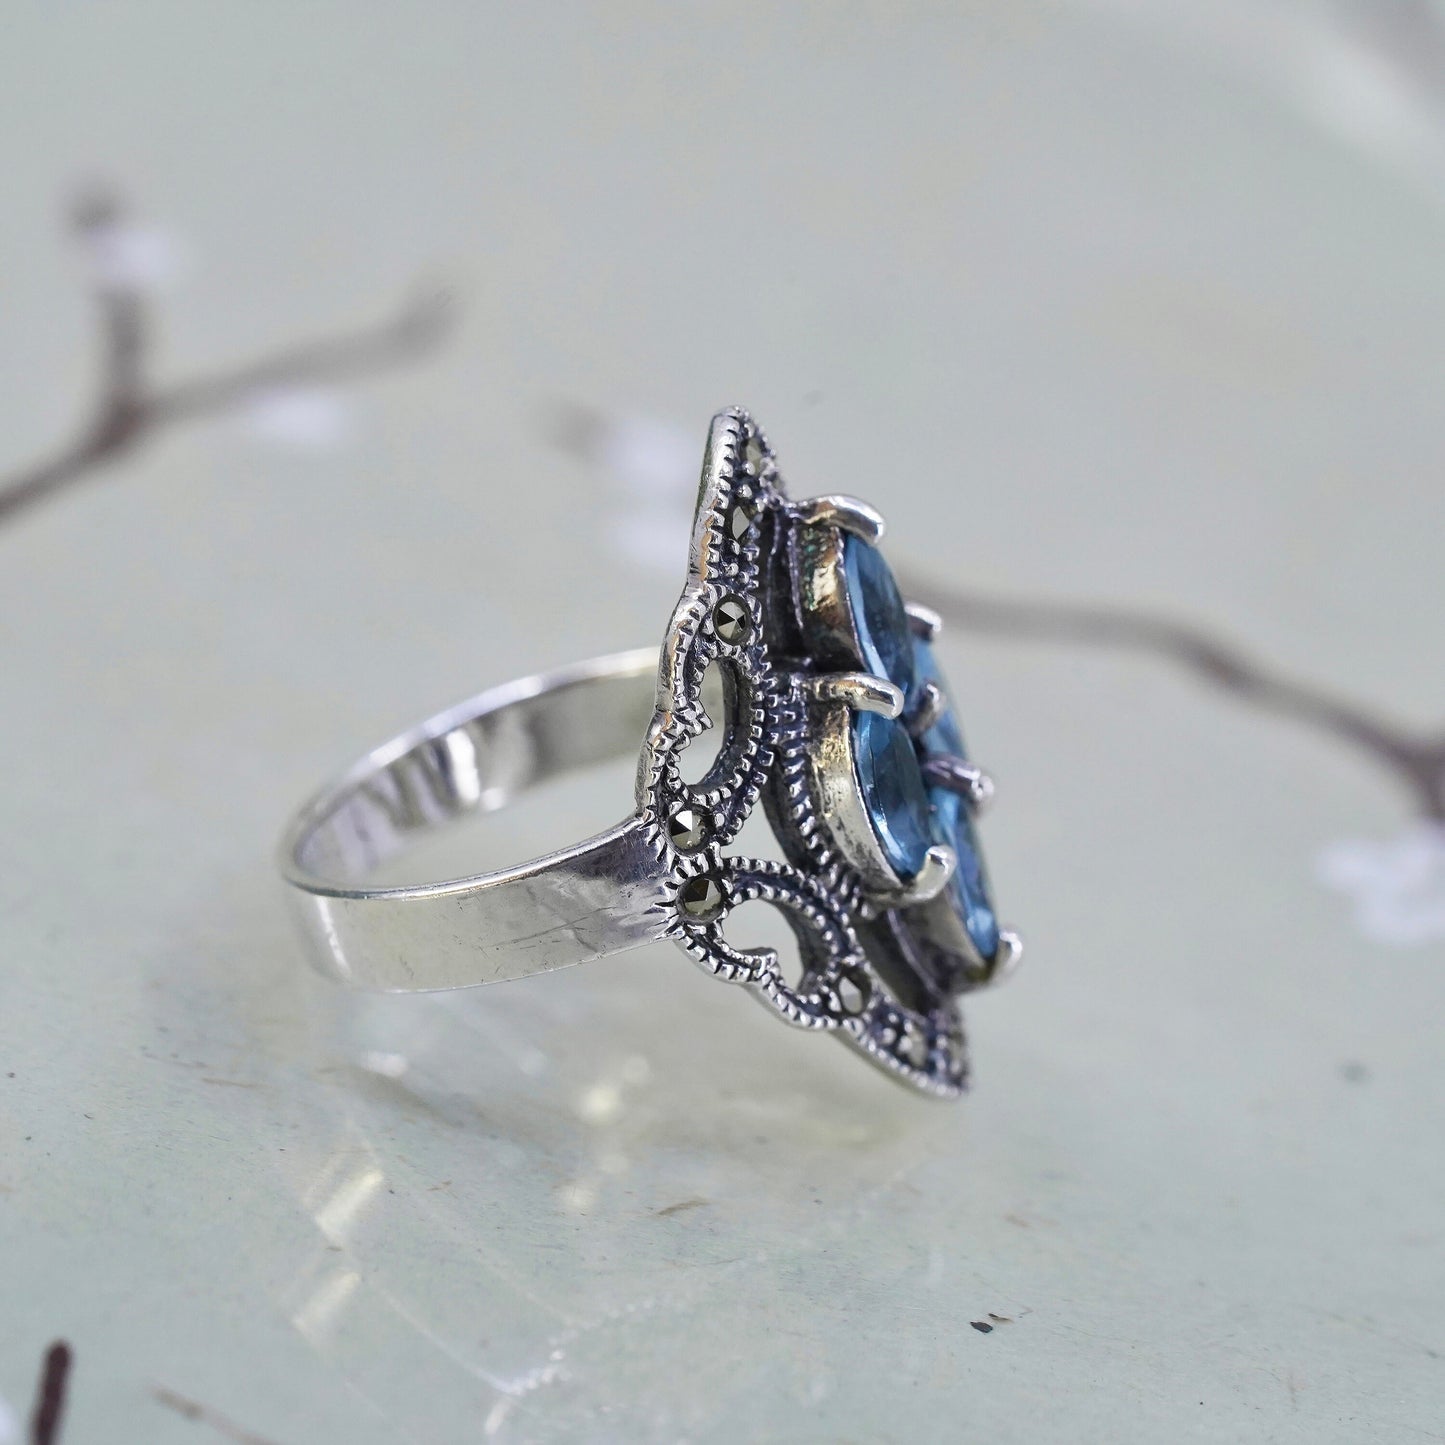 Size 6, Sterling 925 silver handmade ring with blue Crystal and marcasite